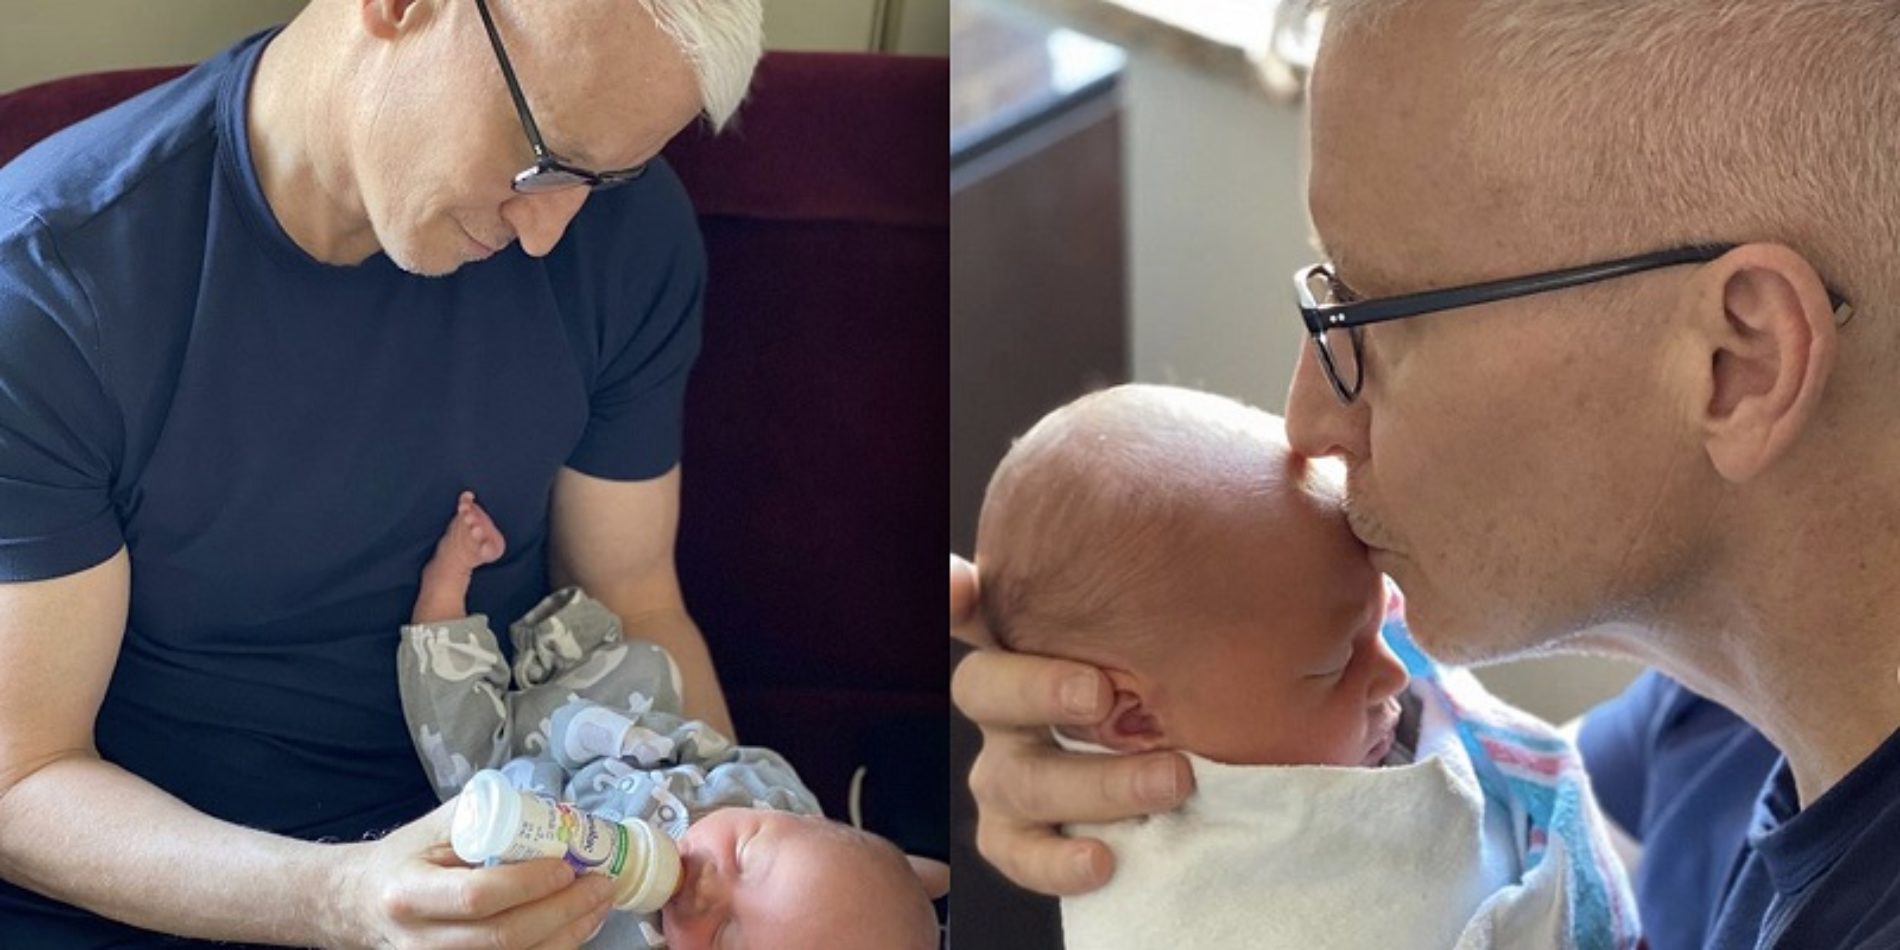 “I have become a father.” Anderson Cooper announces birth of baby boy, Wyatt